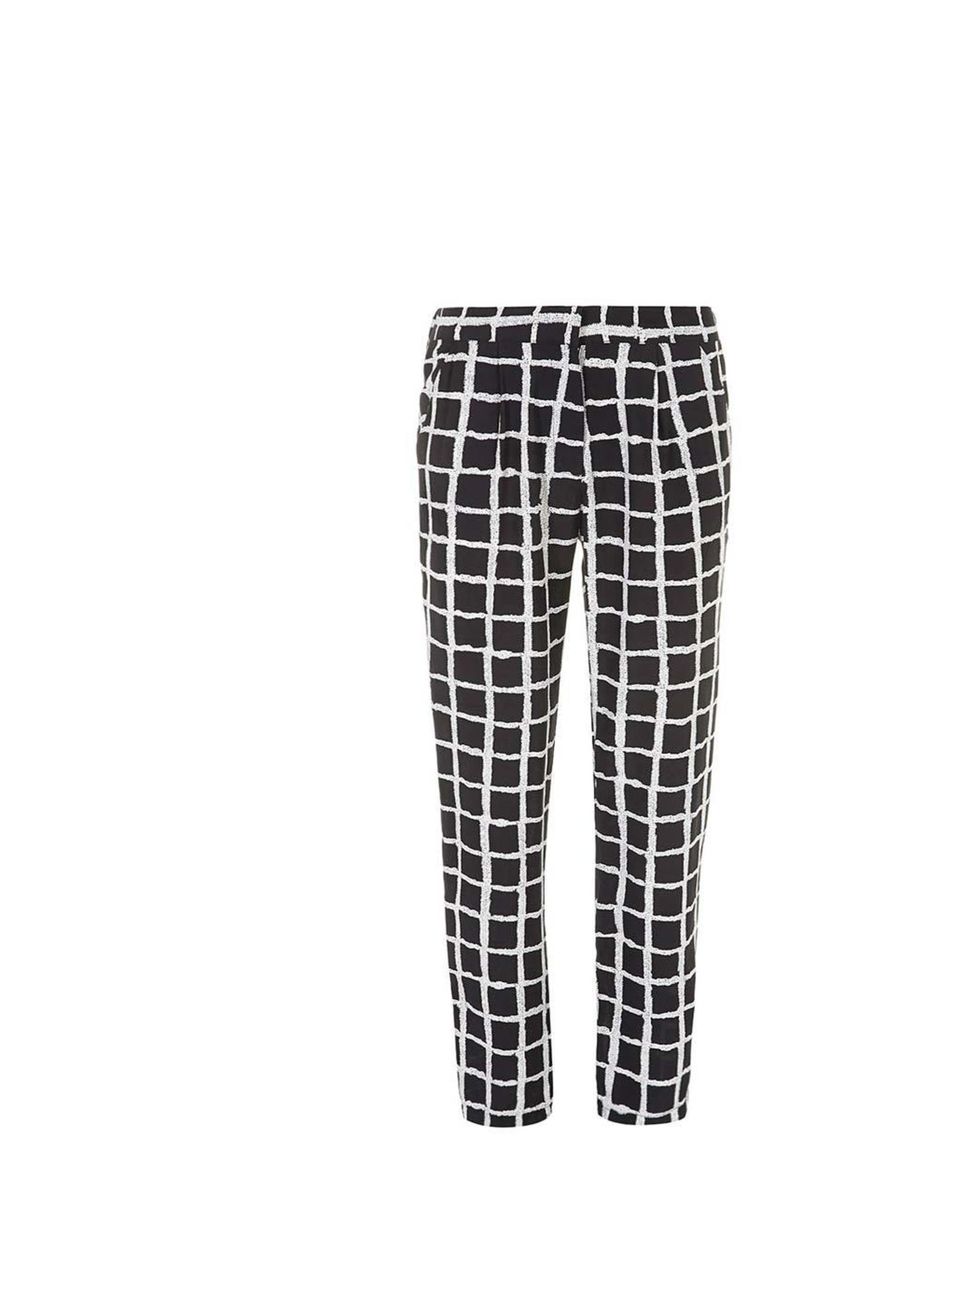 <p>I'll wear these with a white blouse, leather jacket and bright pink shoes.</p><p>- Diana Gavrilina, Digital Picture Intern</p><p><a href="http://www.dorothyperkins.com/en/dpuk/product/clothing-203535/trousers-leggings-203565/black-and-ivory-check-trous